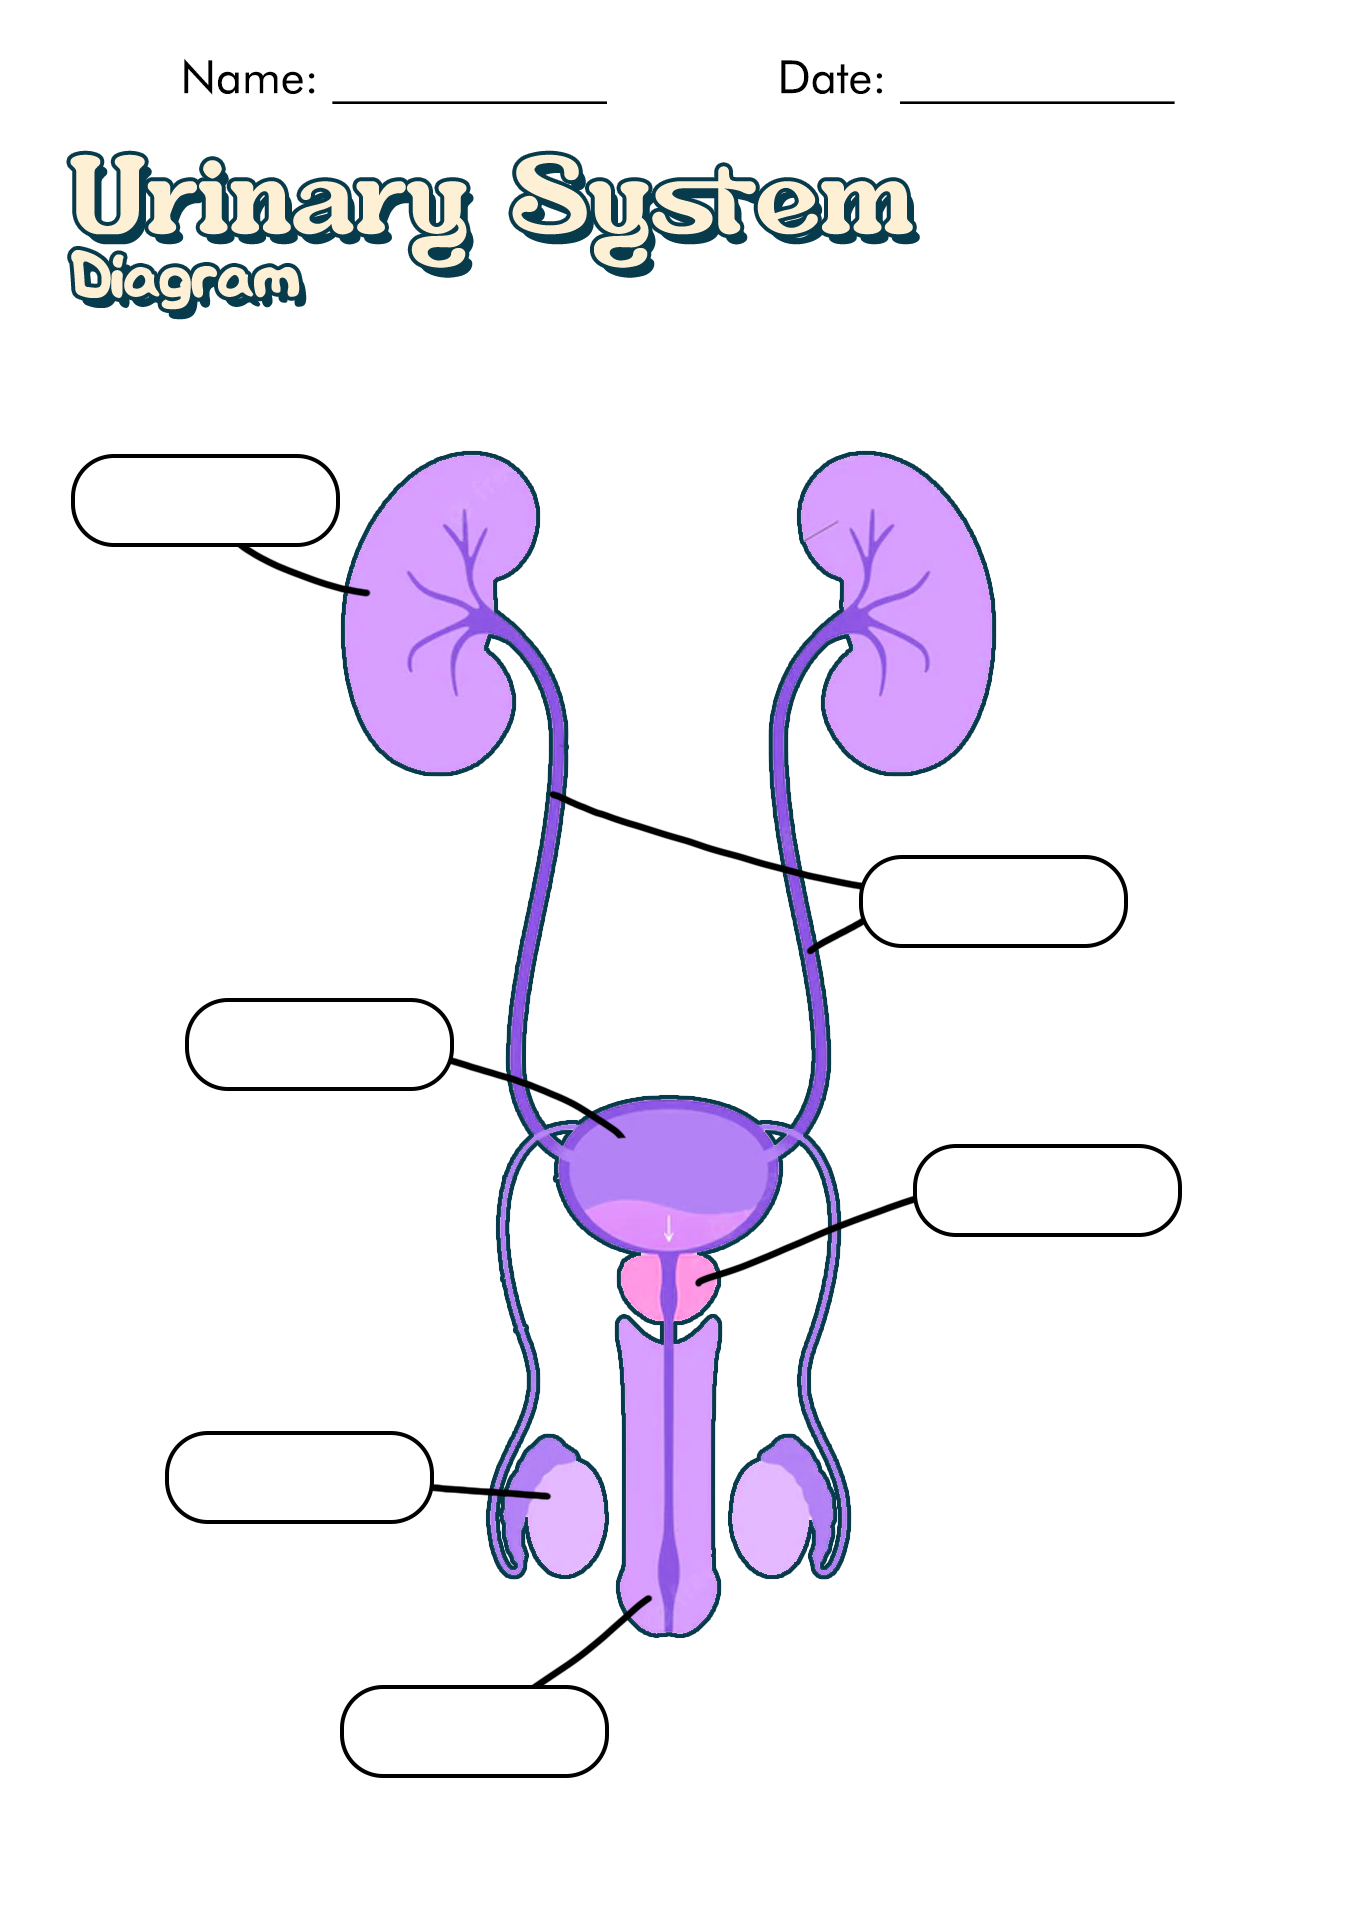 14 Best Images of Urinary System Worksheets - Blank ...